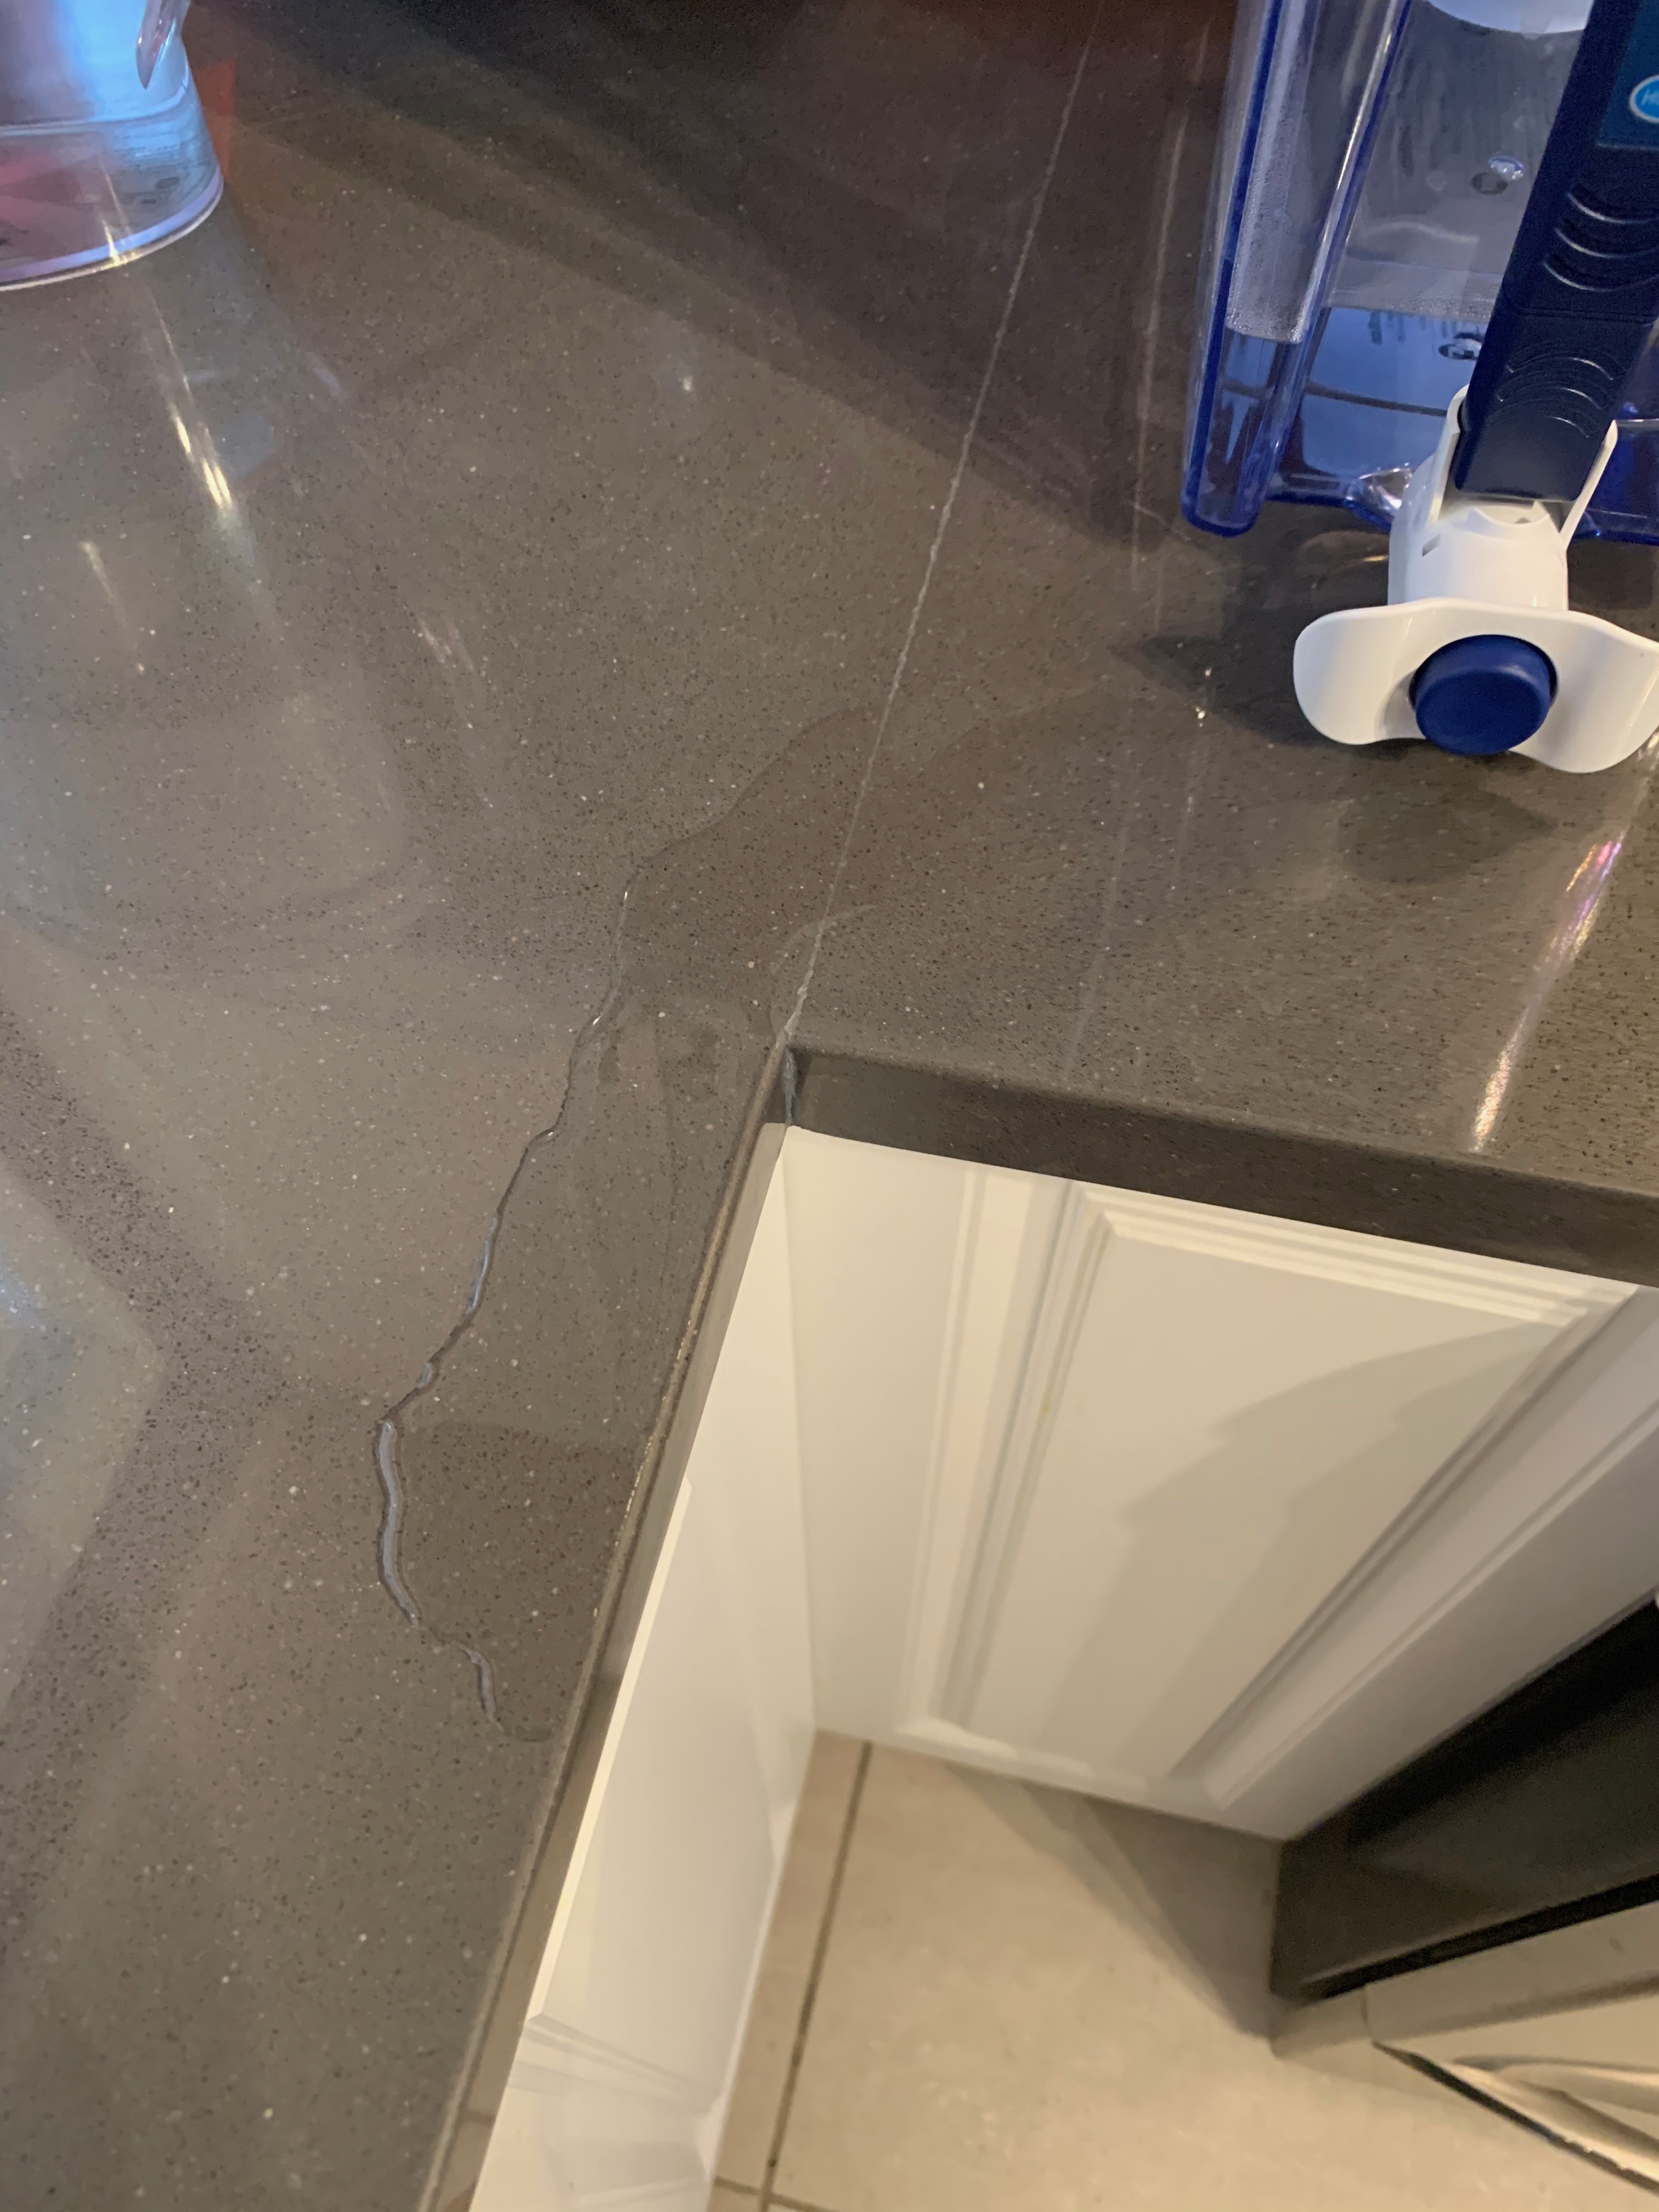 Leaking all over counter.